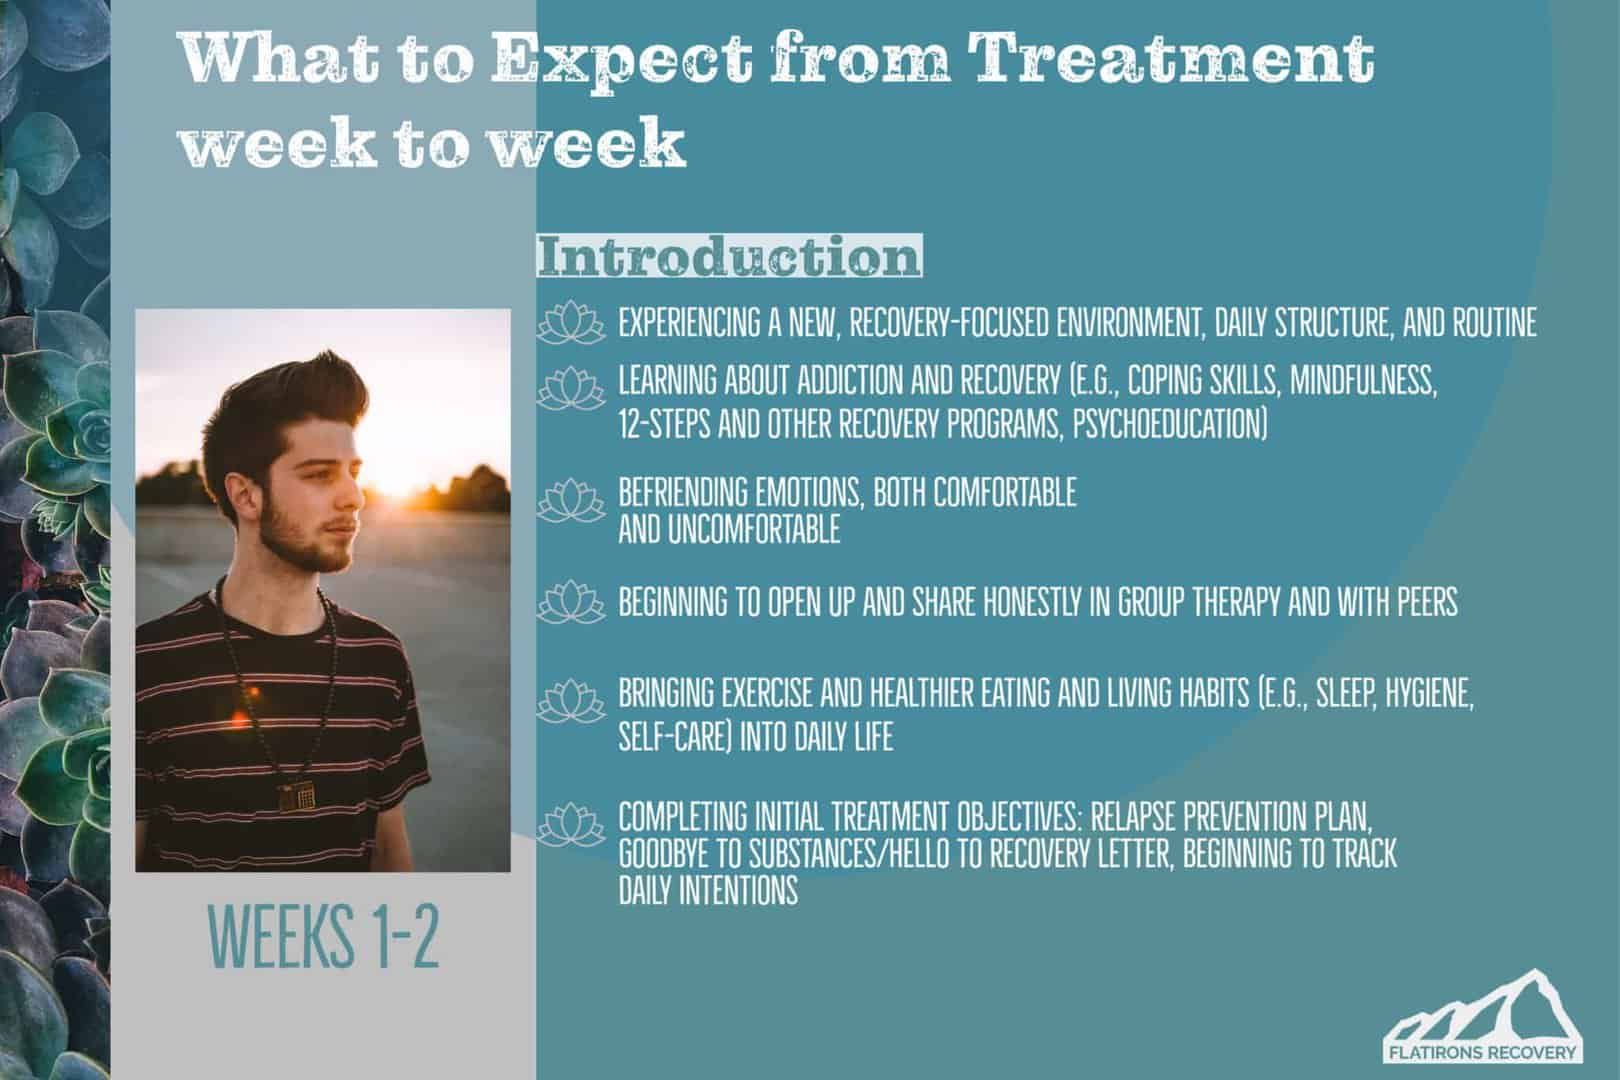 What to expect from treatment week to week